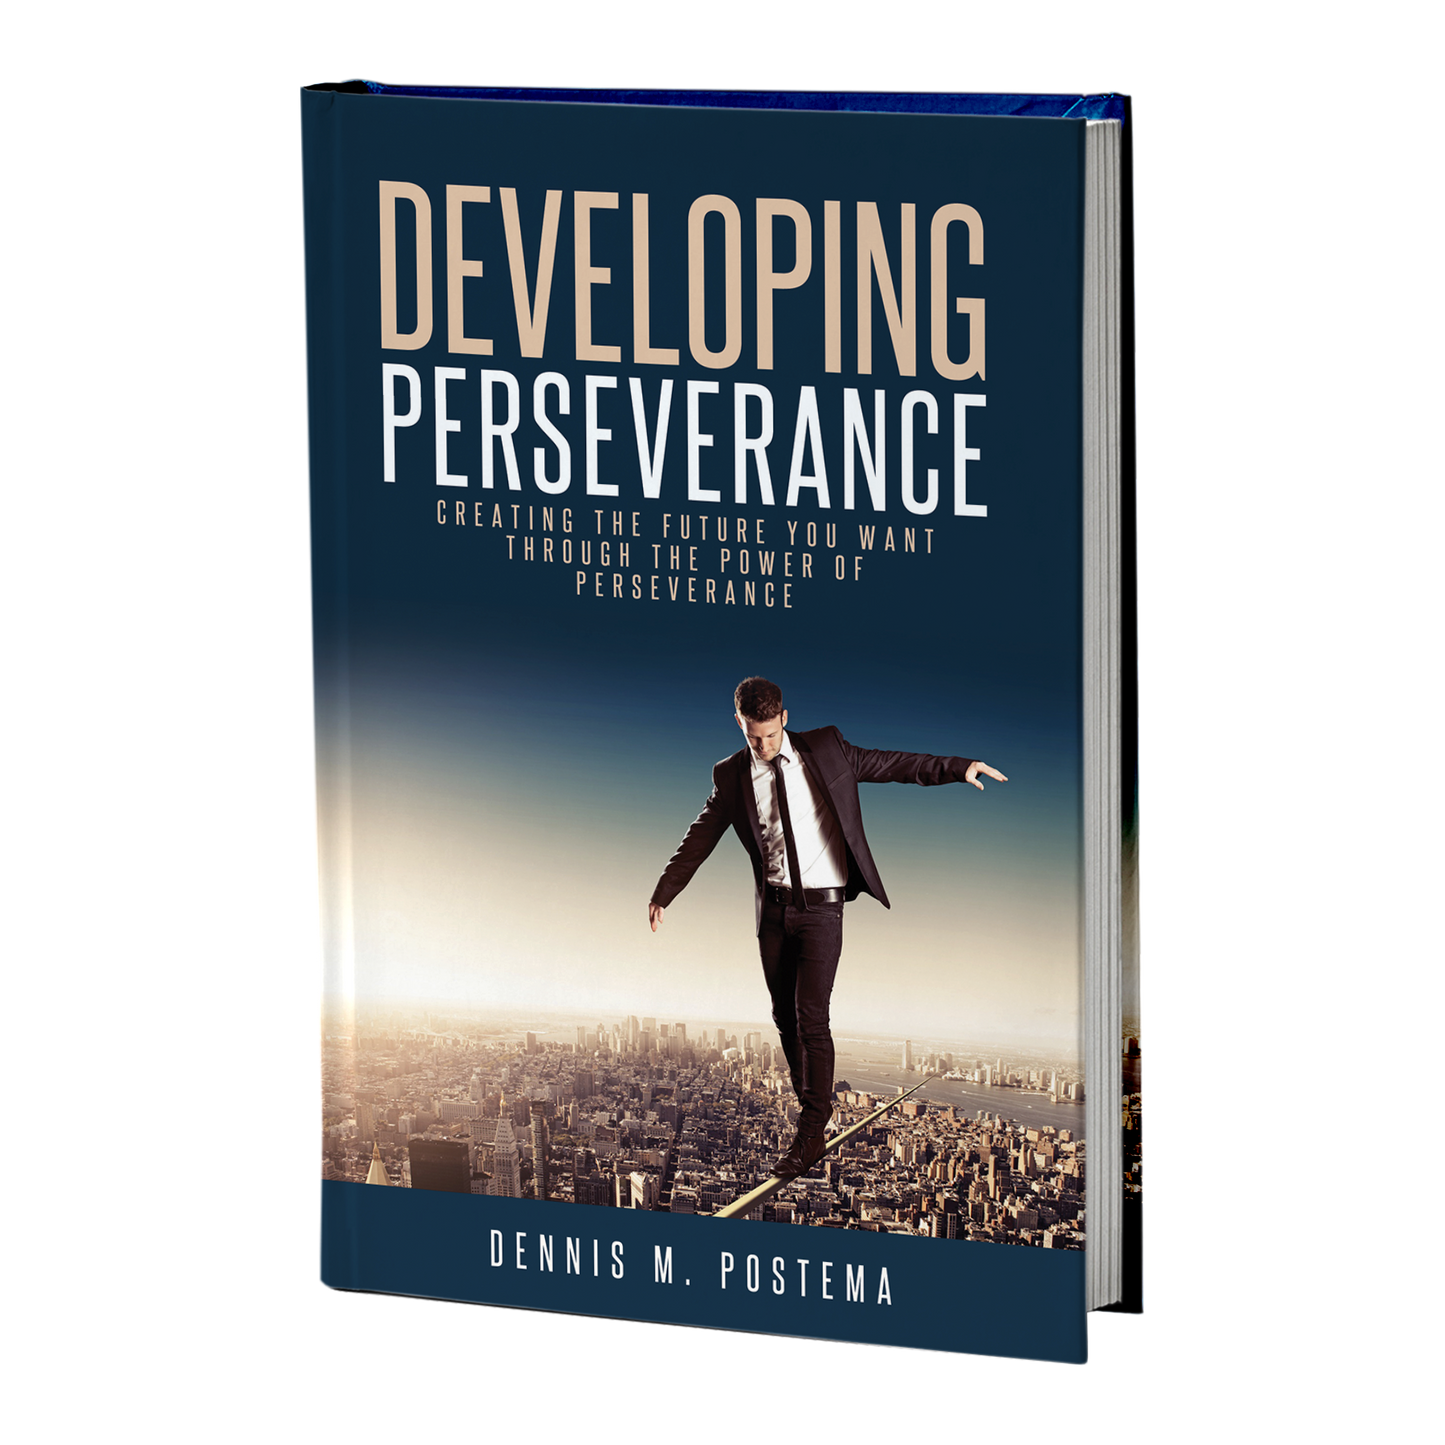 Developing Perseverance: Creating the Future You Want Through the Power of Perseverance